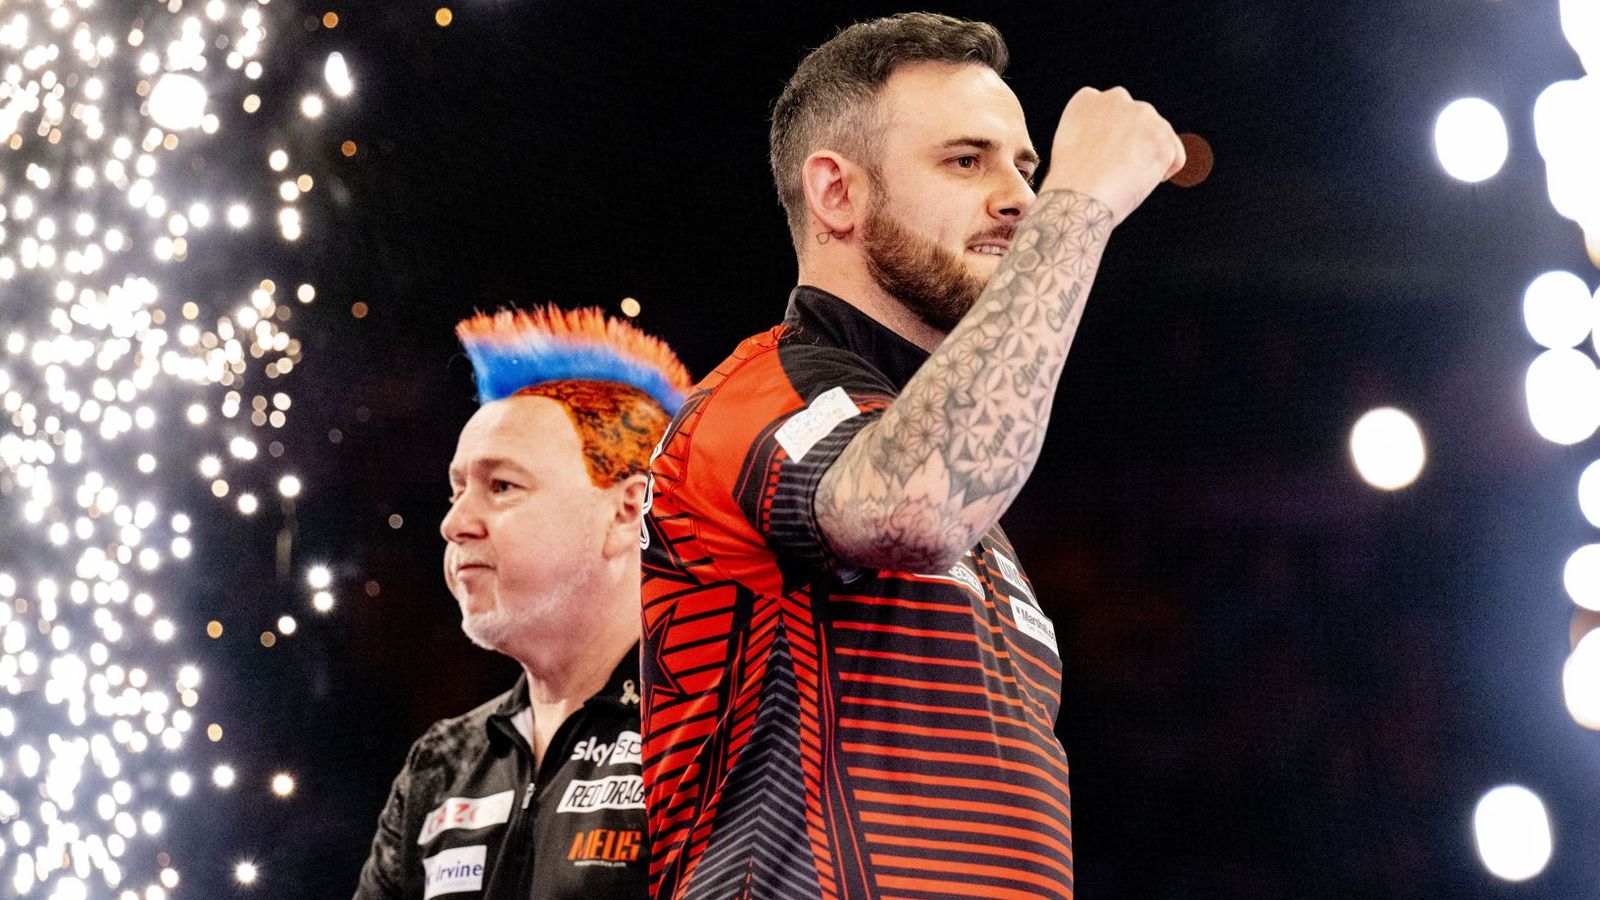 Premier League Darts: Peter Wright and Joe Cullen face off for final Play-Off spot in Newcastle